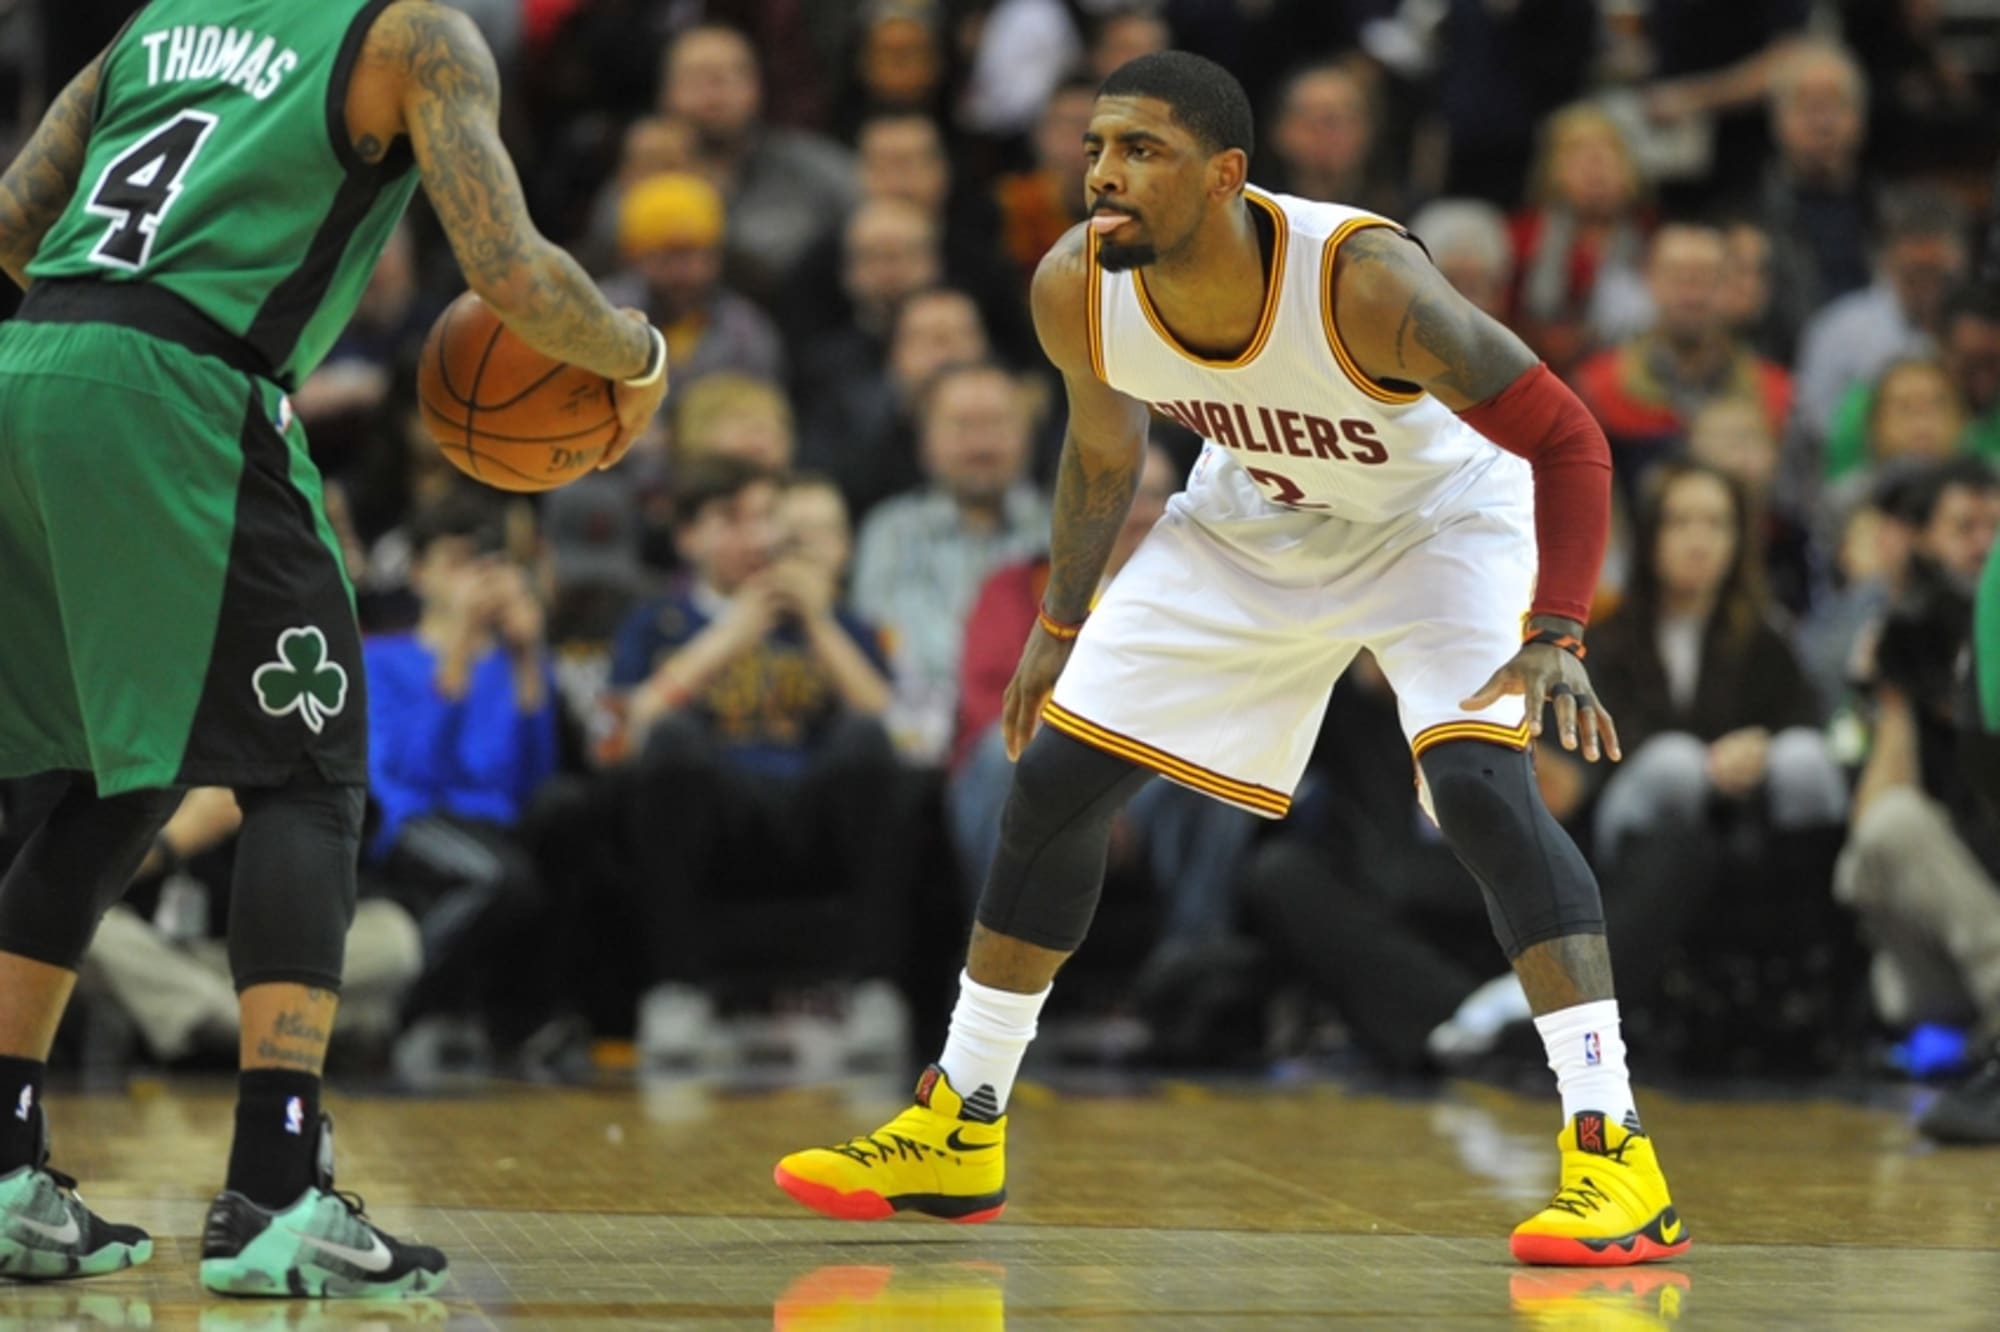 Do you agree with Isaiah Thomas that Kyrie Irving is definitely